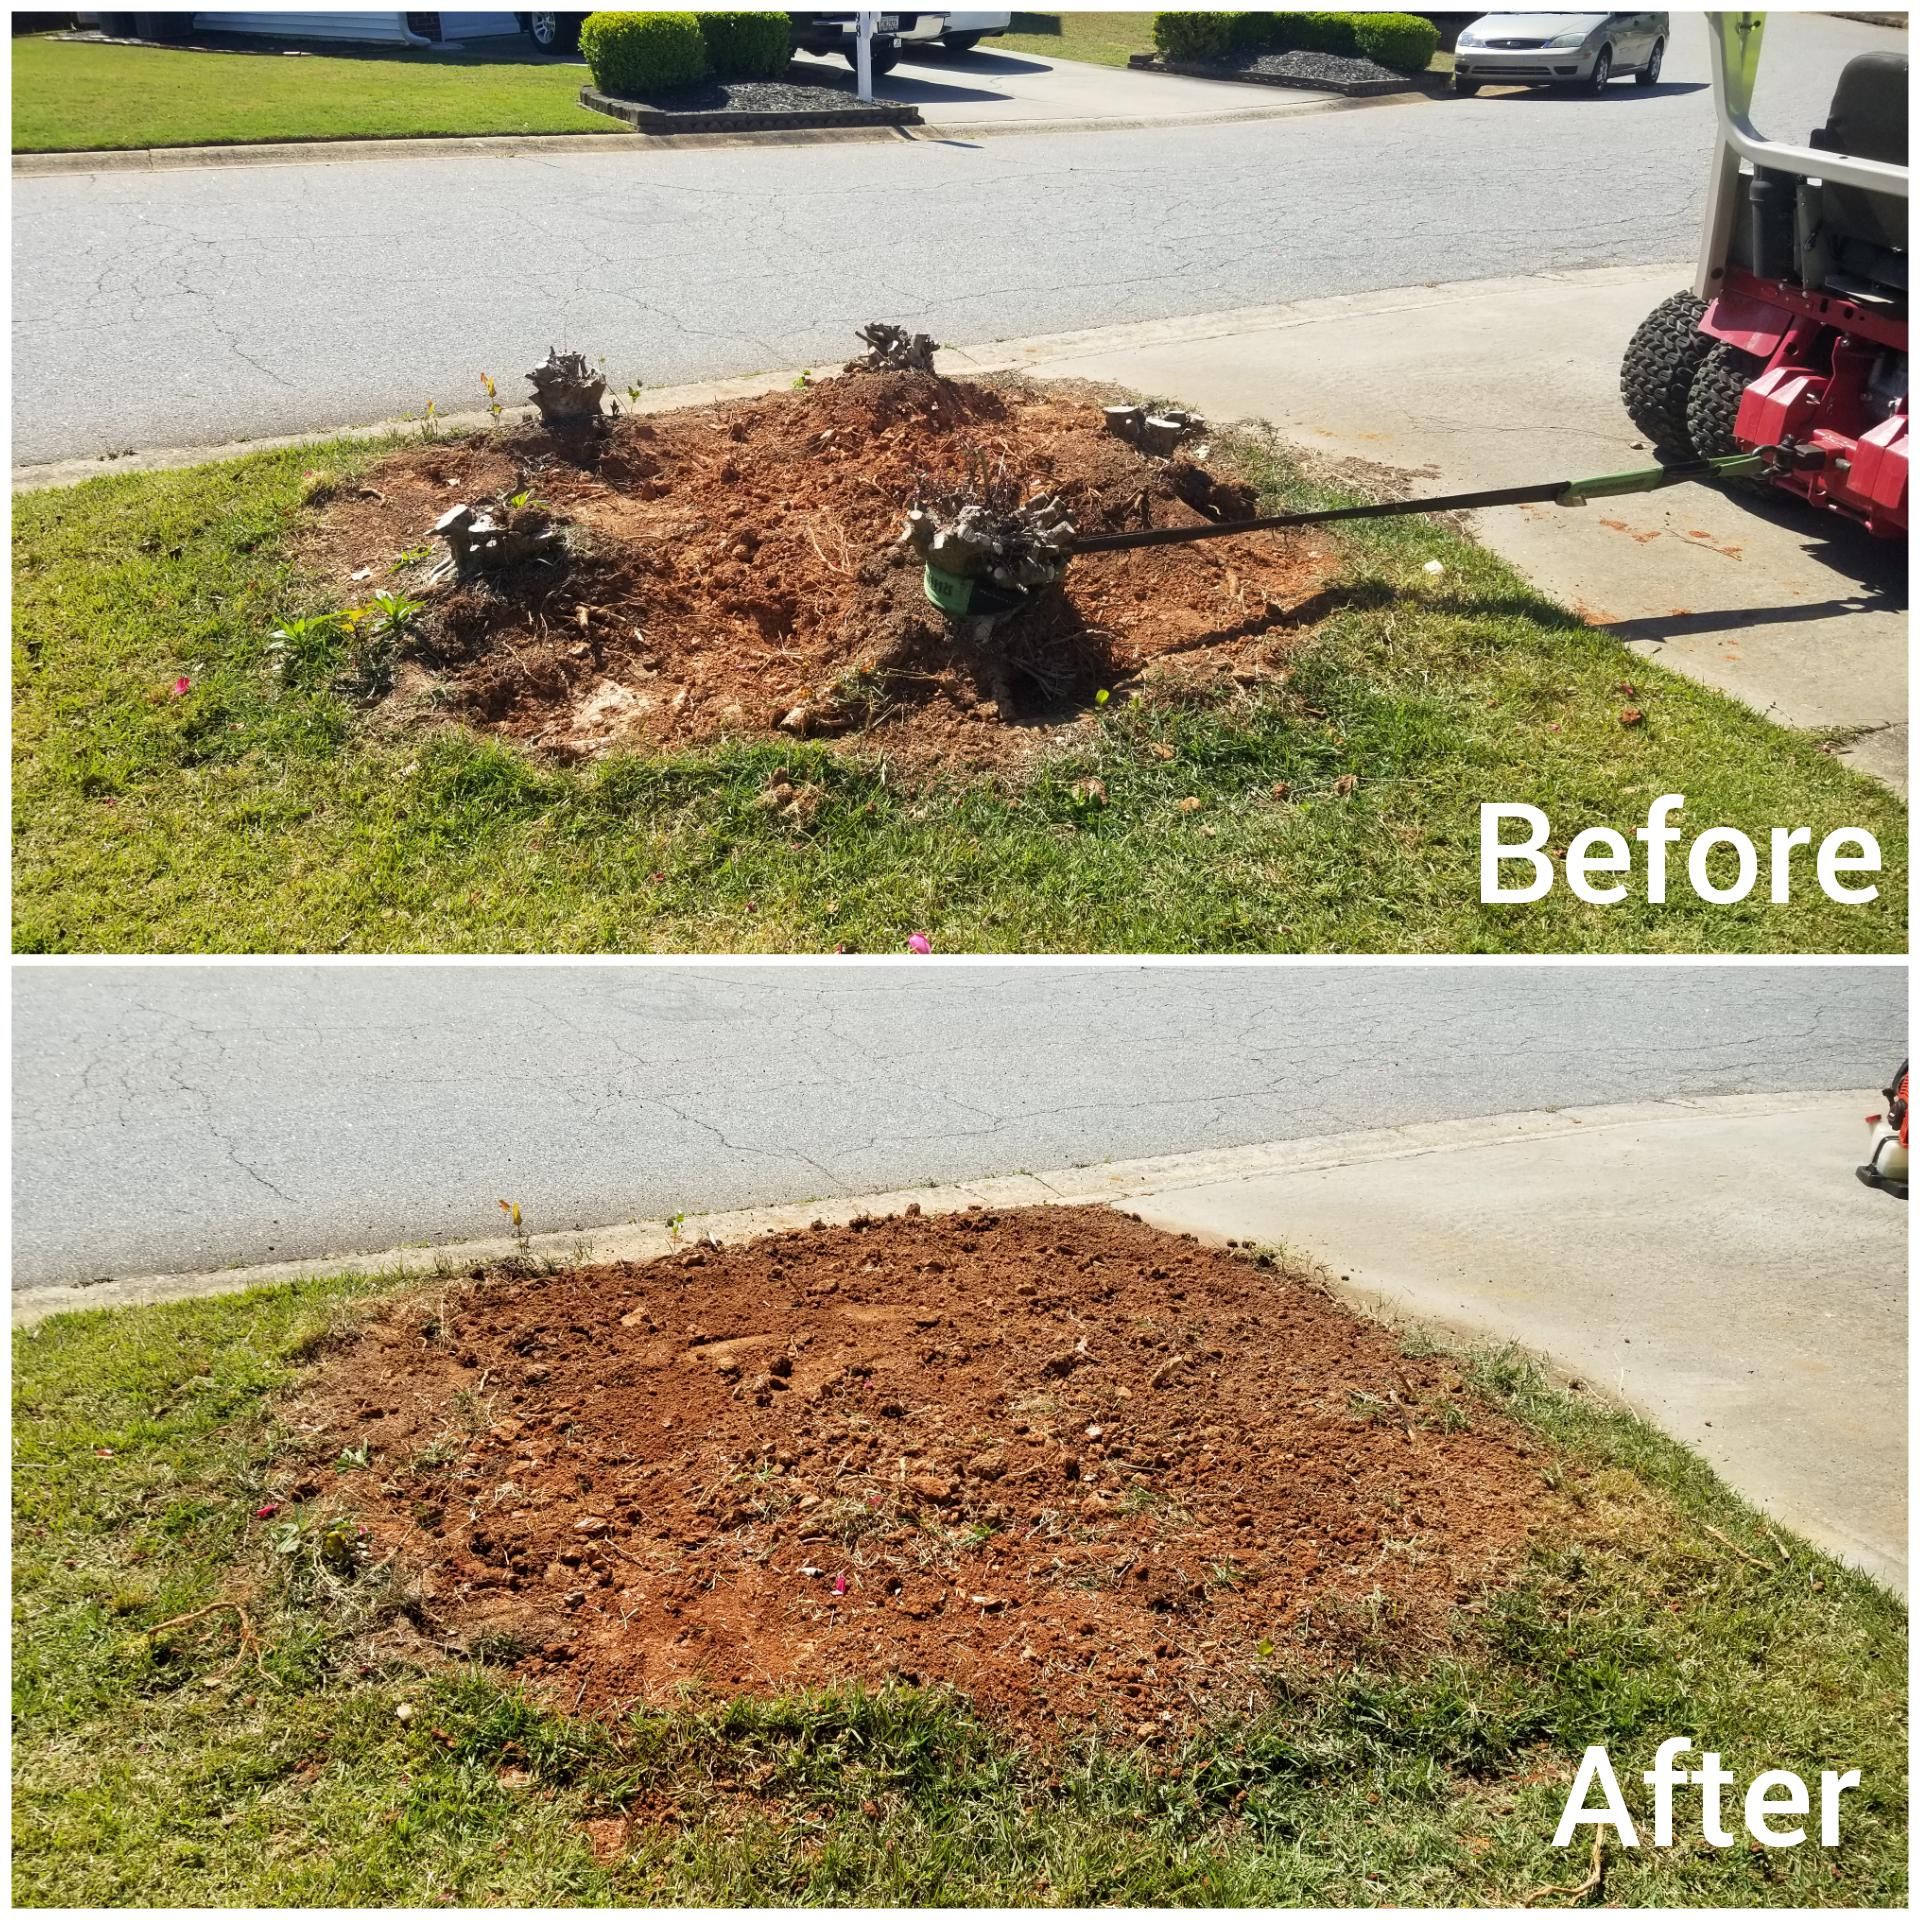 Stump-Grinding for Fayette Property Solutions in Fayetteville, GA